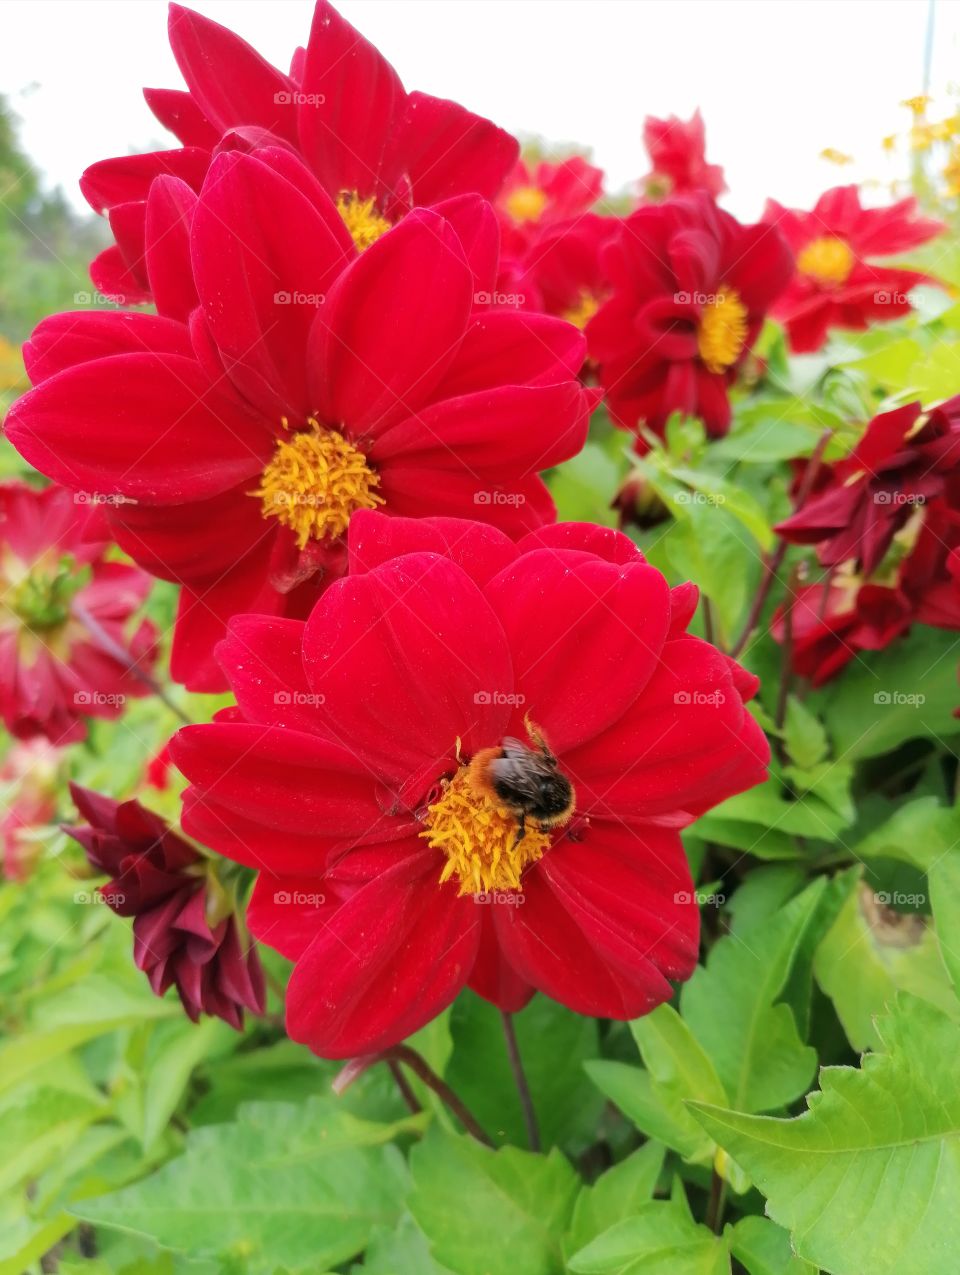 A bee pollinating a red flower